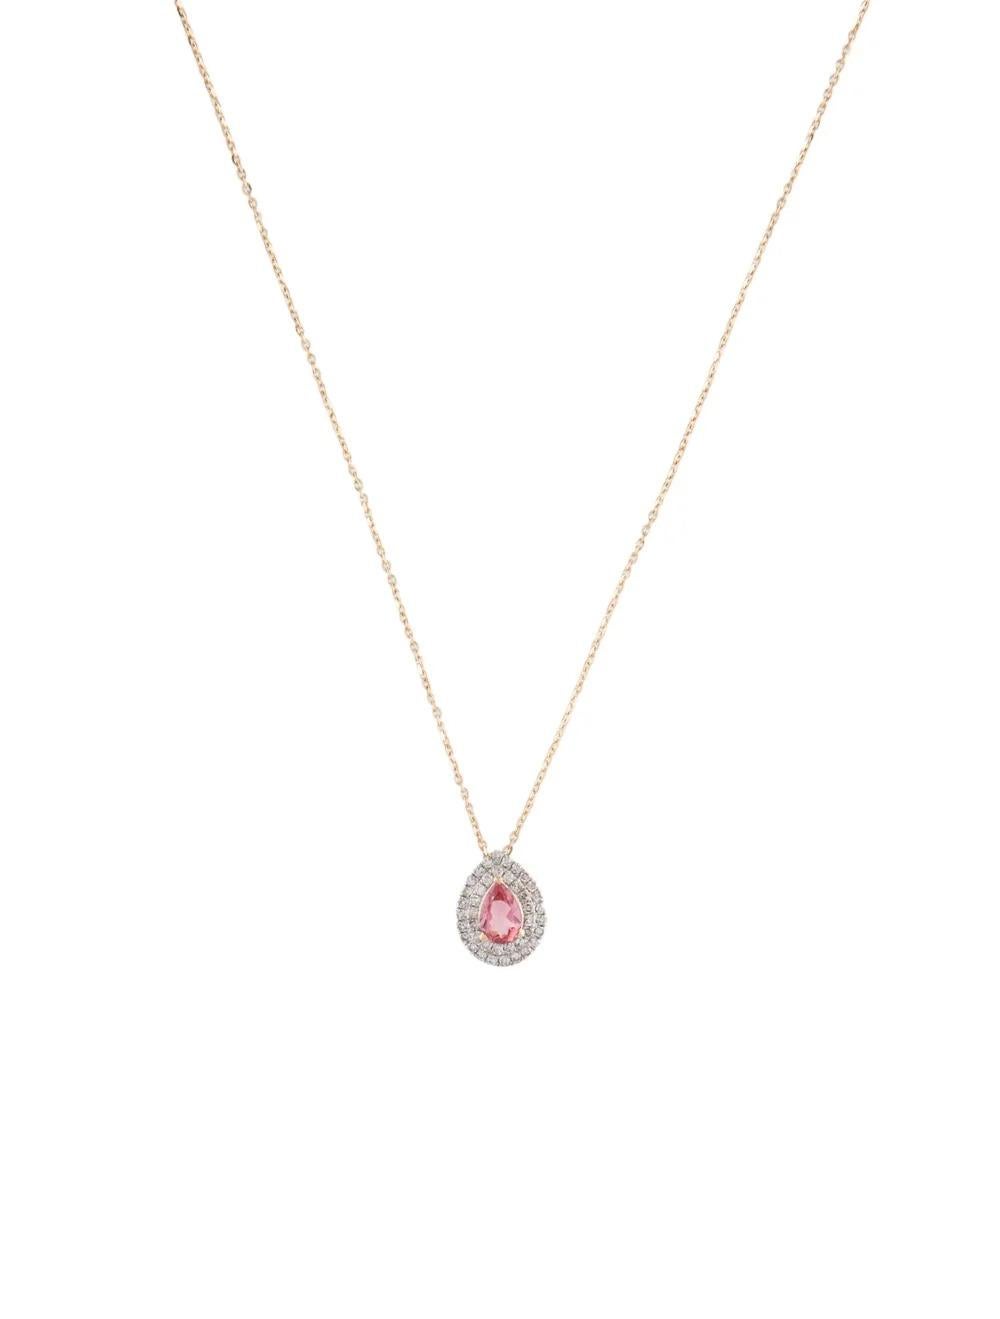 Elevate your jewelry collection with this exquisite 14K Yellow Gold Pendant Necklace, featuring a stunning Pear Modified Brilliant Tourmaline and sparkling Diamonds.

Specifications:

* Metal Type: 14K Yellow Gold
* Length: Adjustable from 16